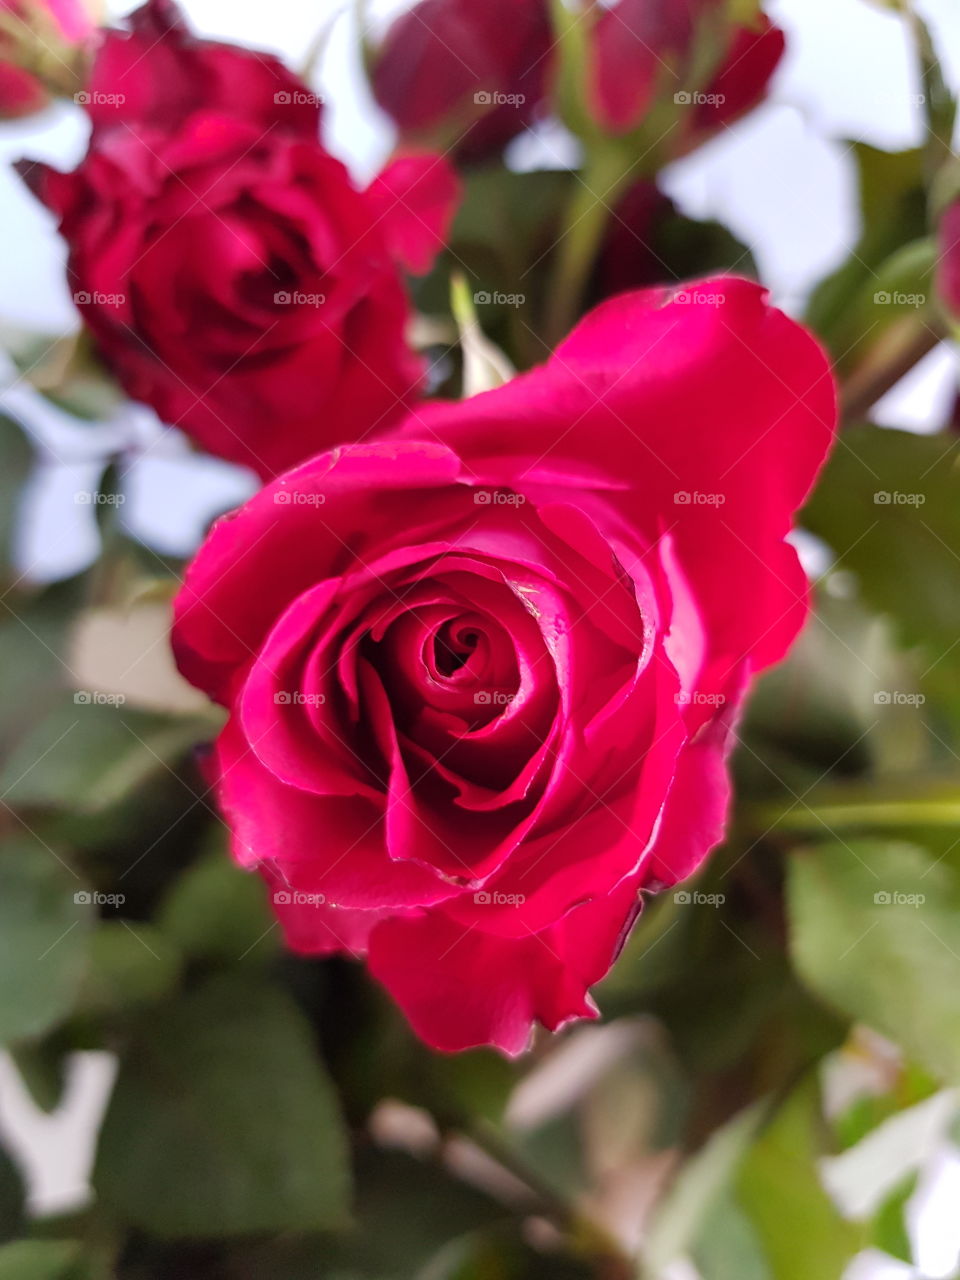 The lovely red roses